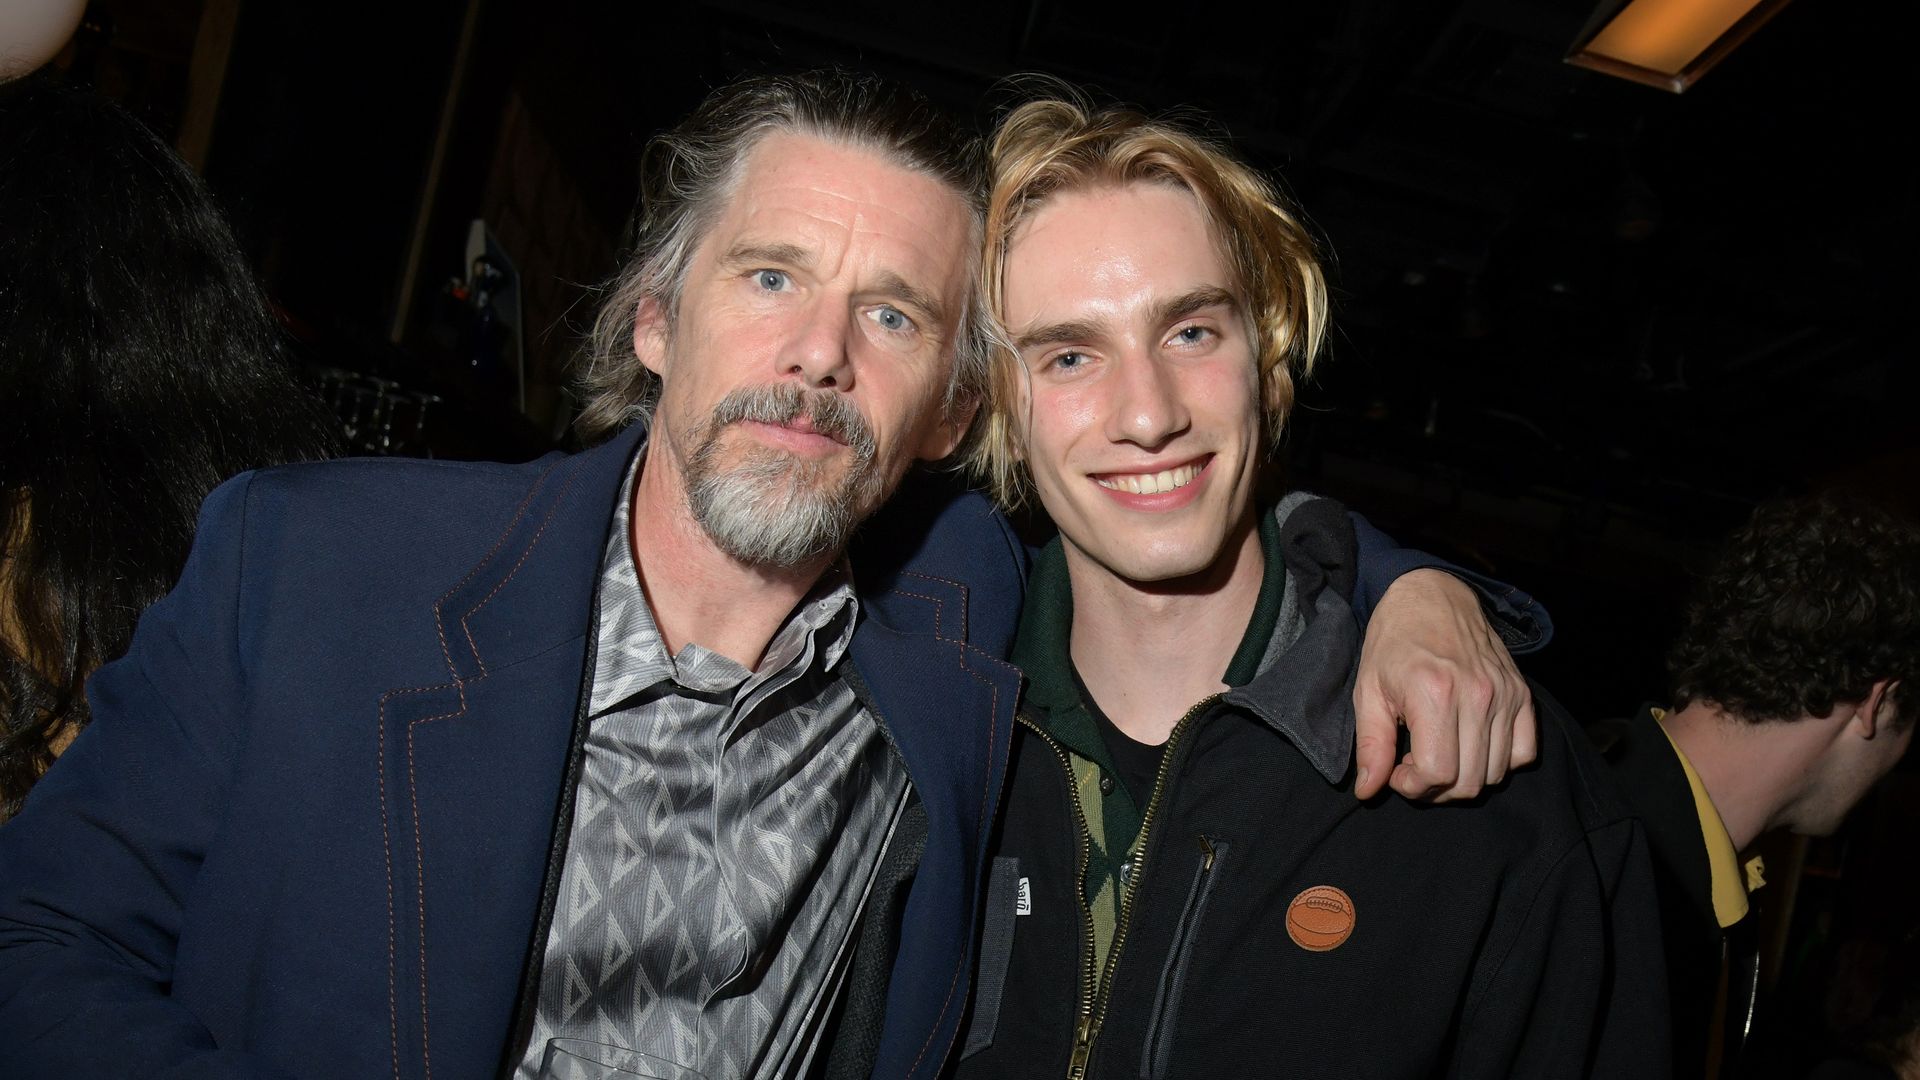 Uma Thurman and Ethan Hawke's son makes his directorial debut